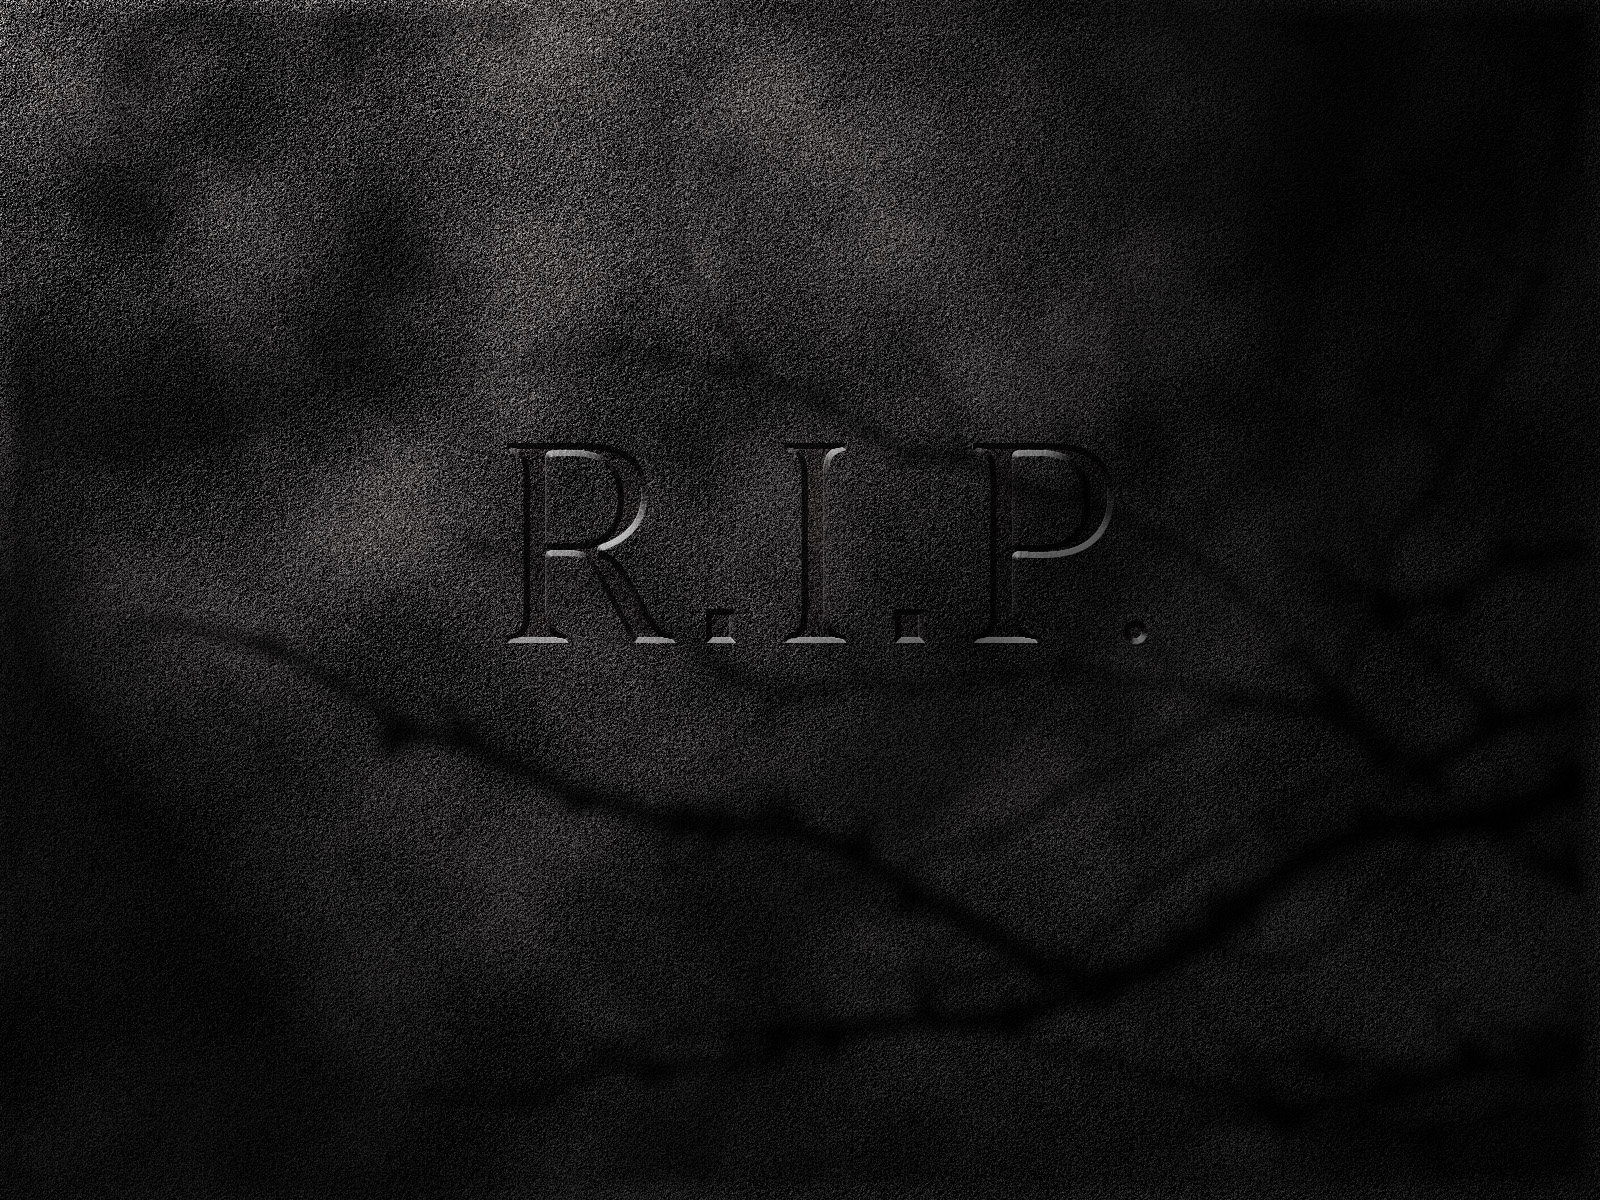 43+ Rest in Peace Wallpapers on WallpaperSafari